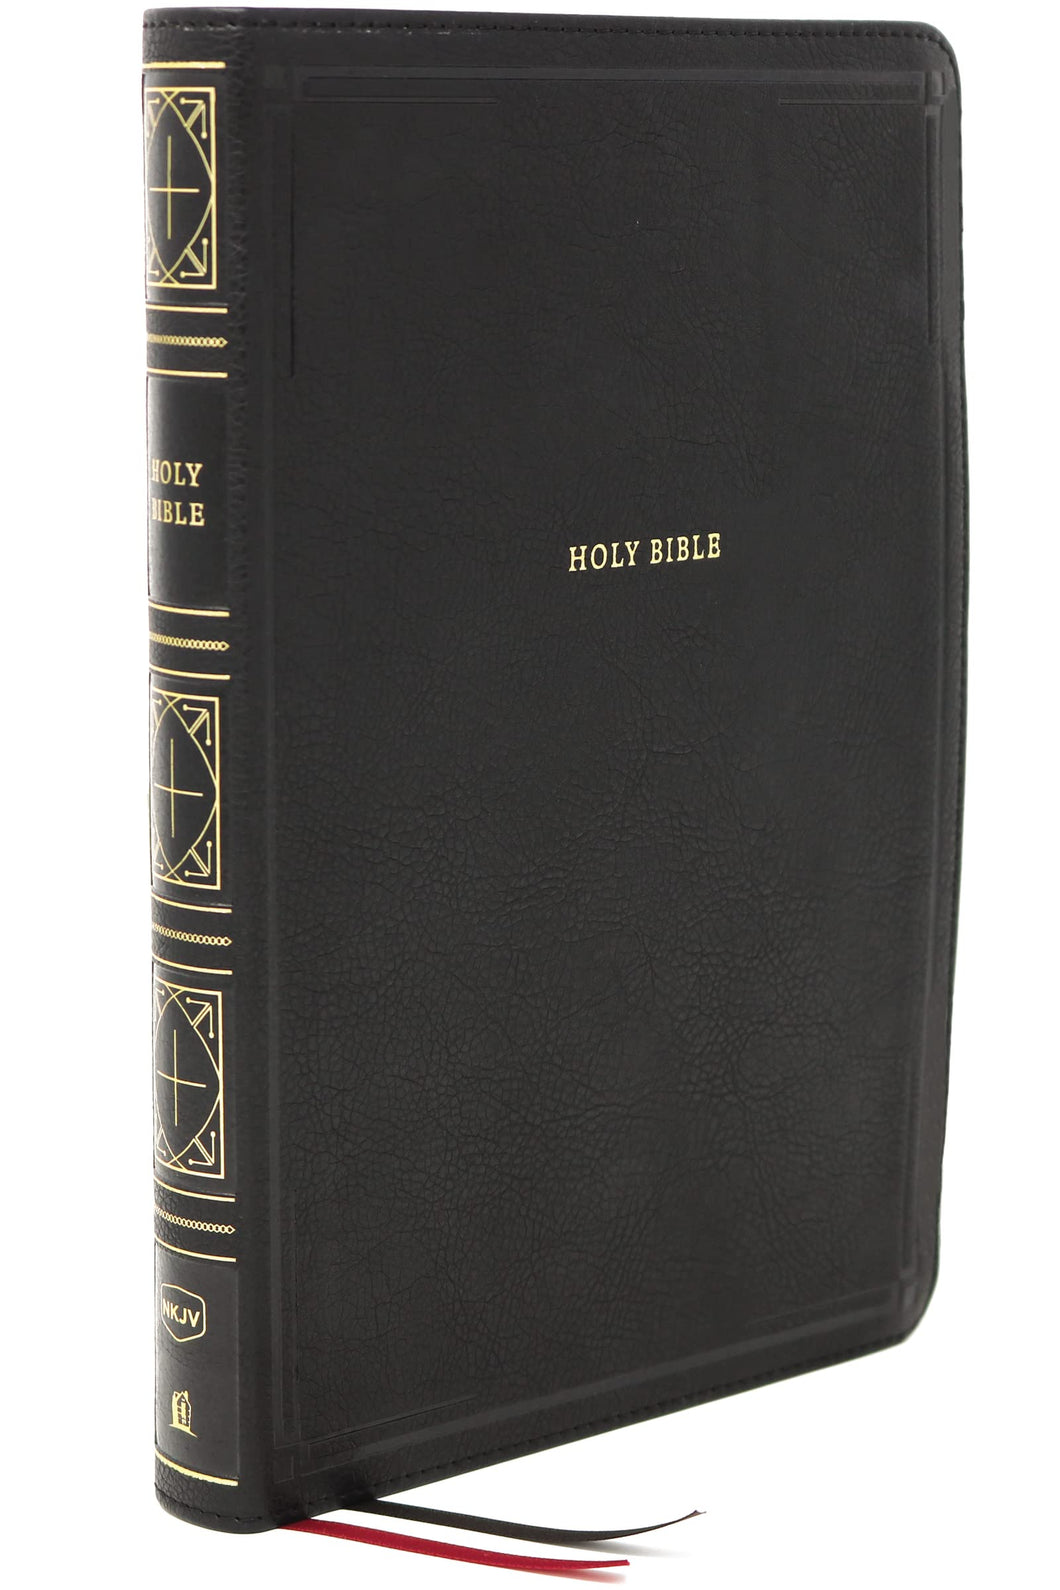 NKJV Holy Bible, Giant Print Thinline Bible, Black Leathersoft, Thumb Indexed, Red Letter, Comfort Print: New King James Version: Holy Bible, Imitation Leather – Large Print